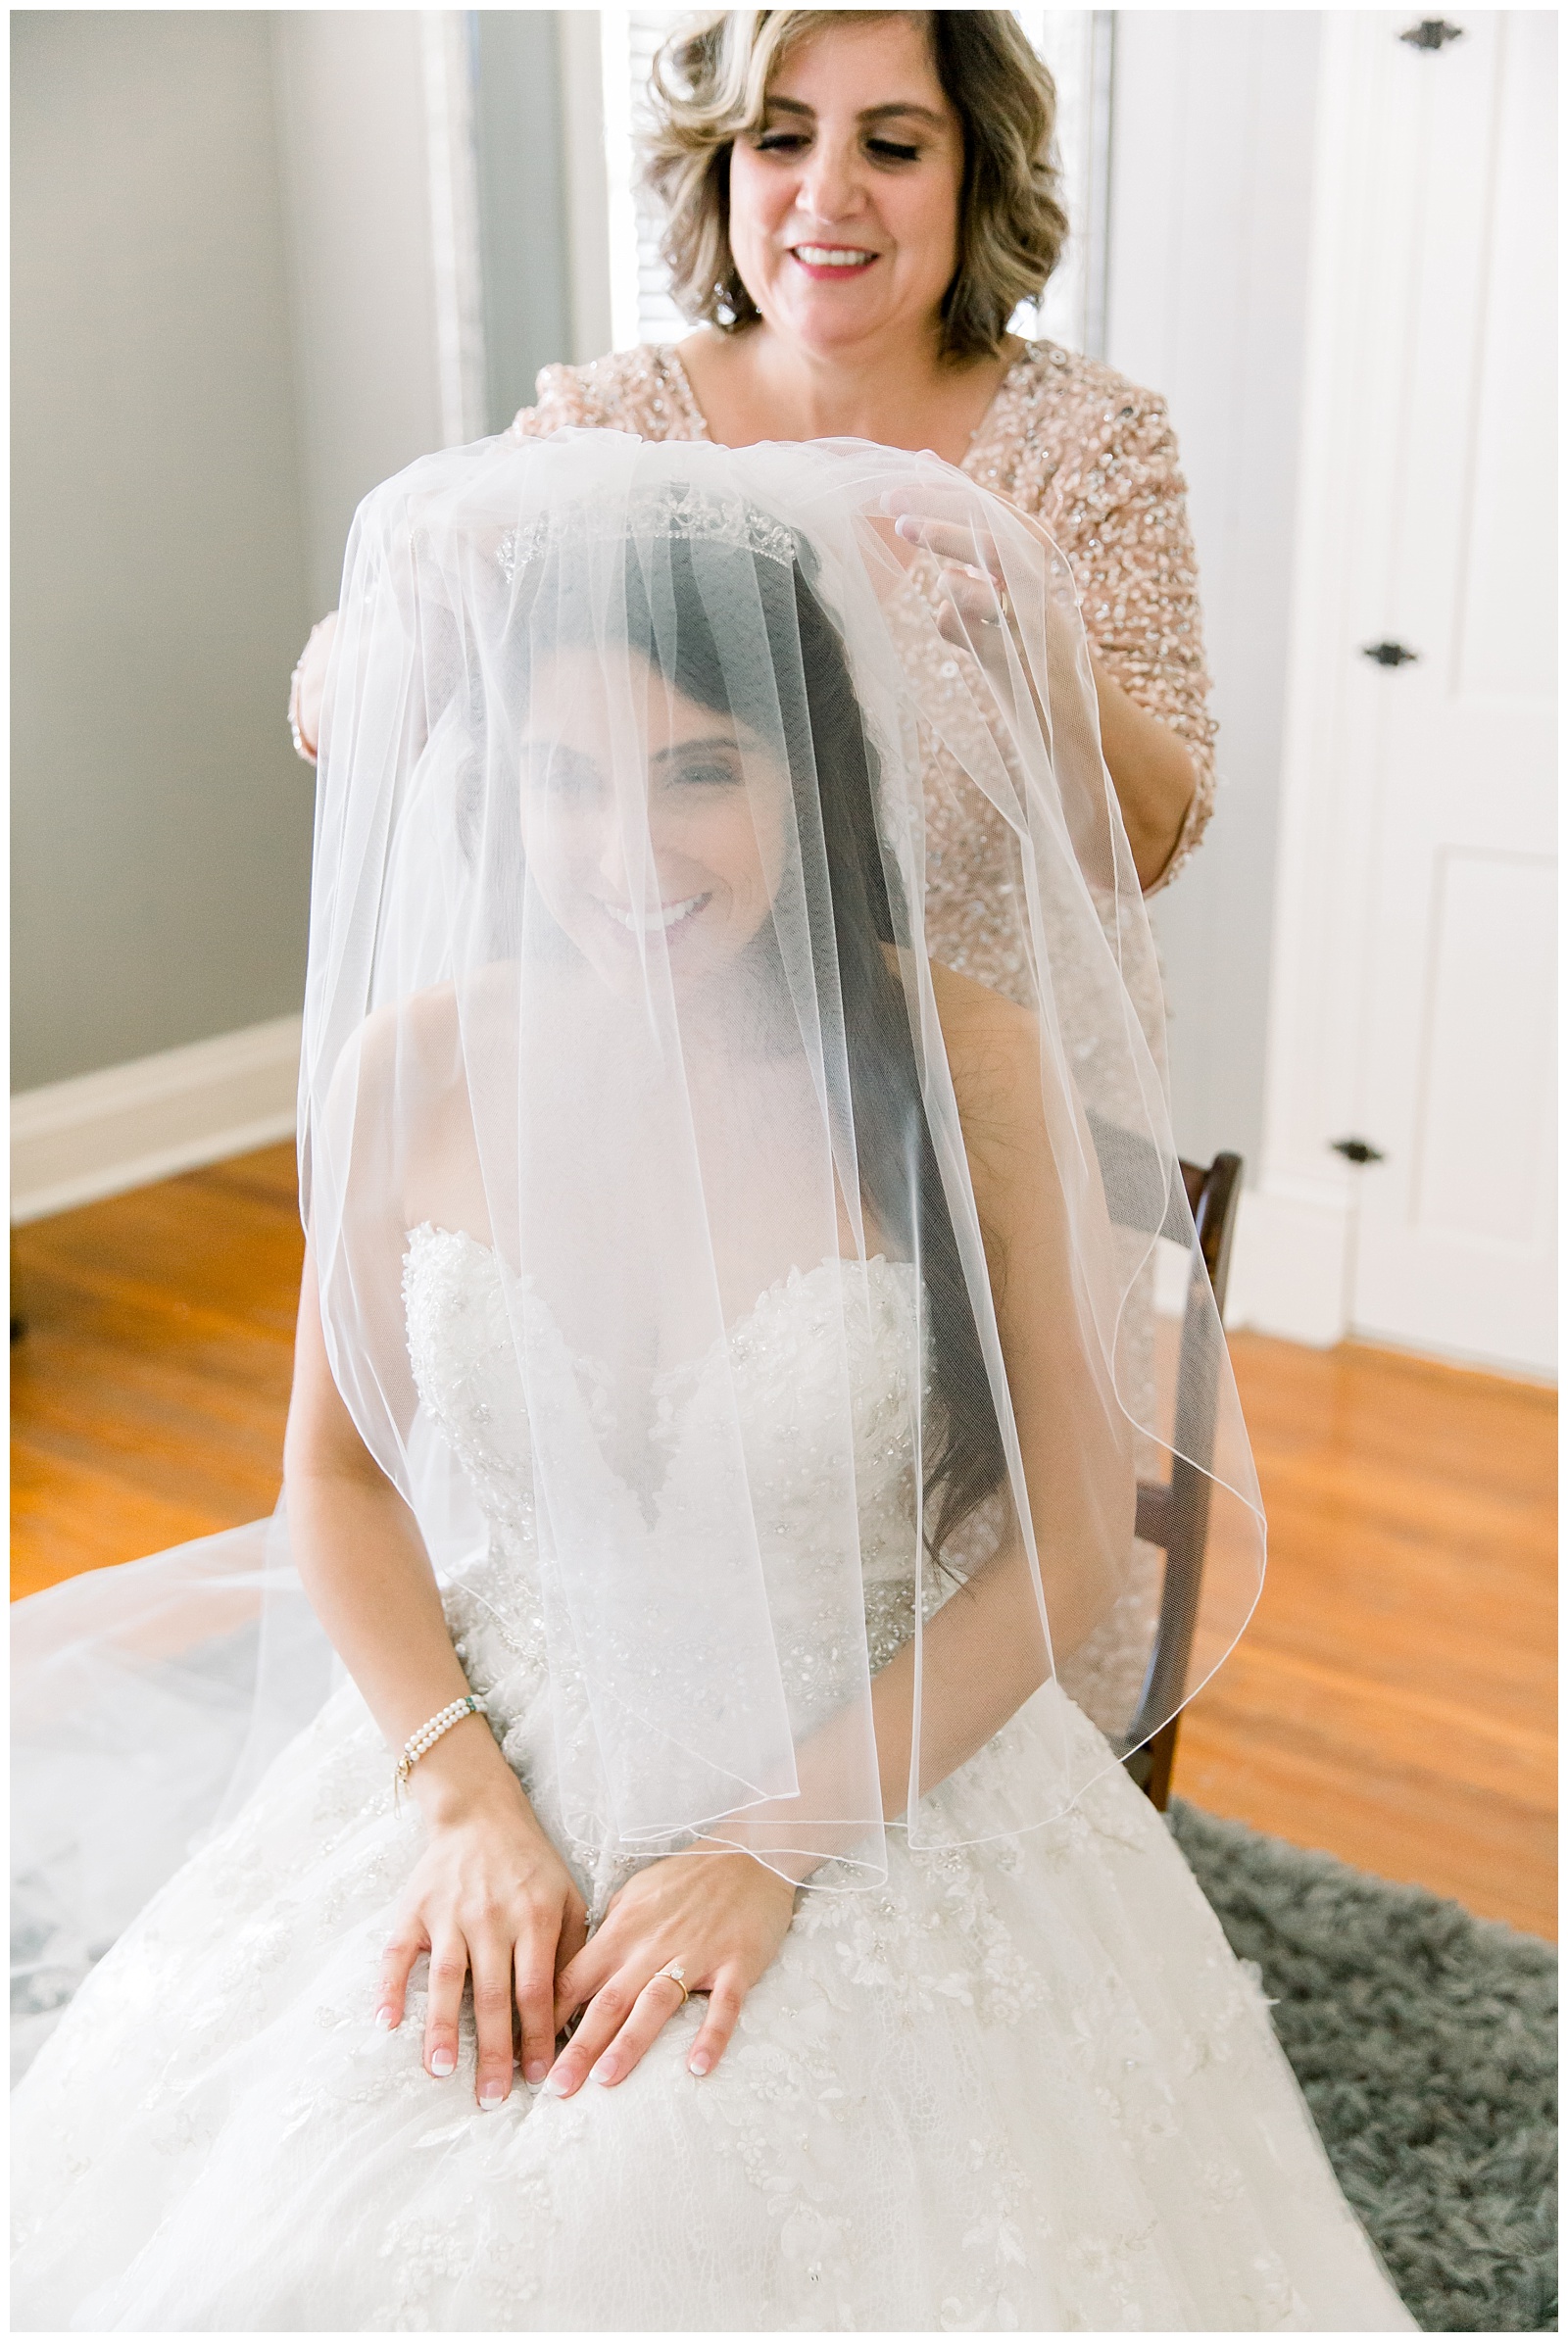 Special moment of bride's mother helping her put on her veil for a Romantic Wedding at The Allen Farmhaus in New Braunfels, TX | San Antonio-Maui-Destination Wedding Photographer | Monica Roberts Photography | www.monicaroberts.com